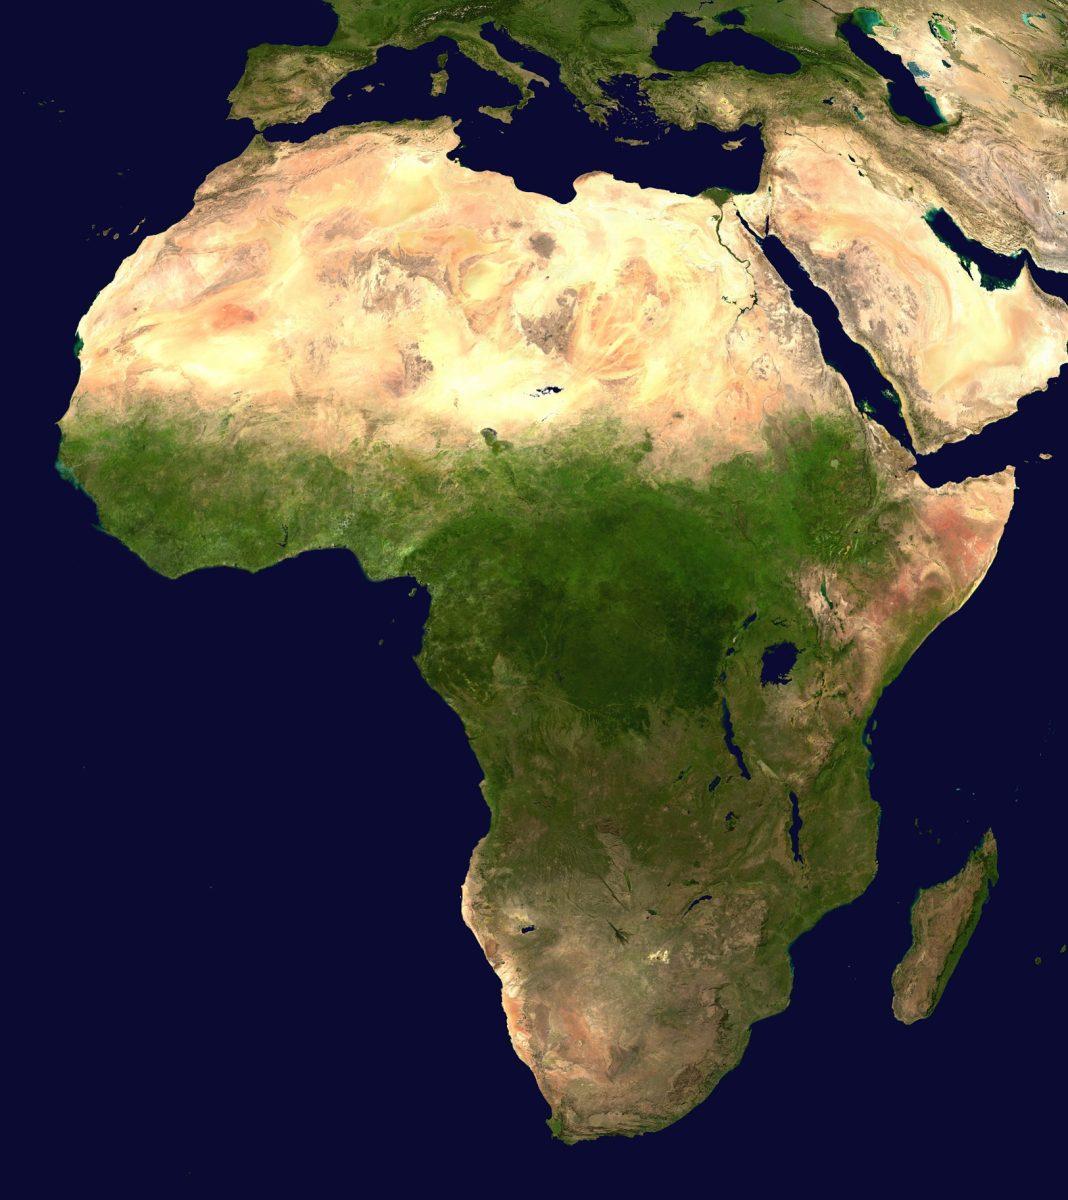 According+to+new+findings%2C+Africa+is+splitting+into+two+continents.